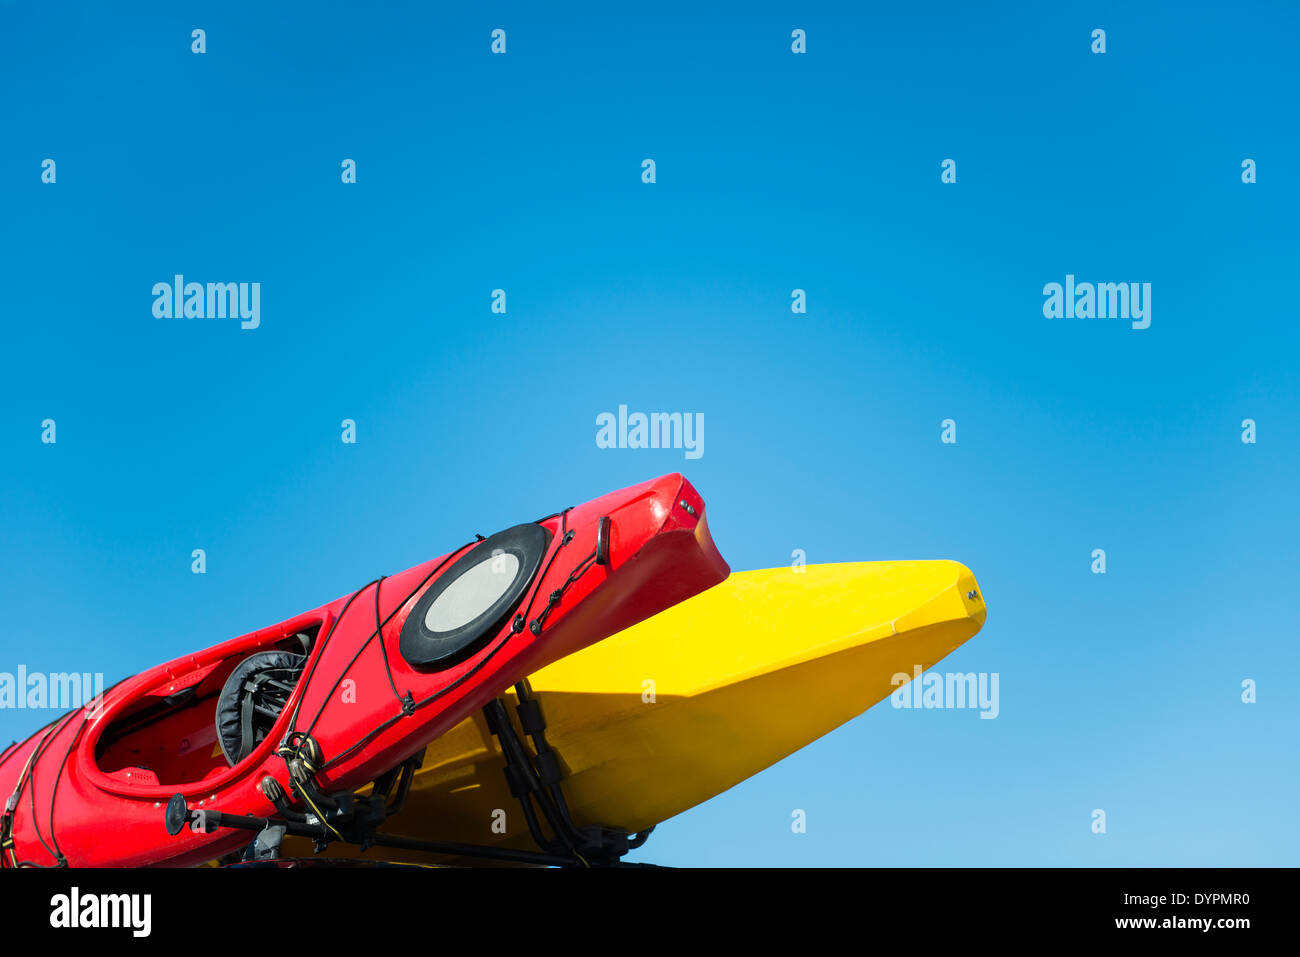 Red and yellow kayaks on blue sky. Stock Photo